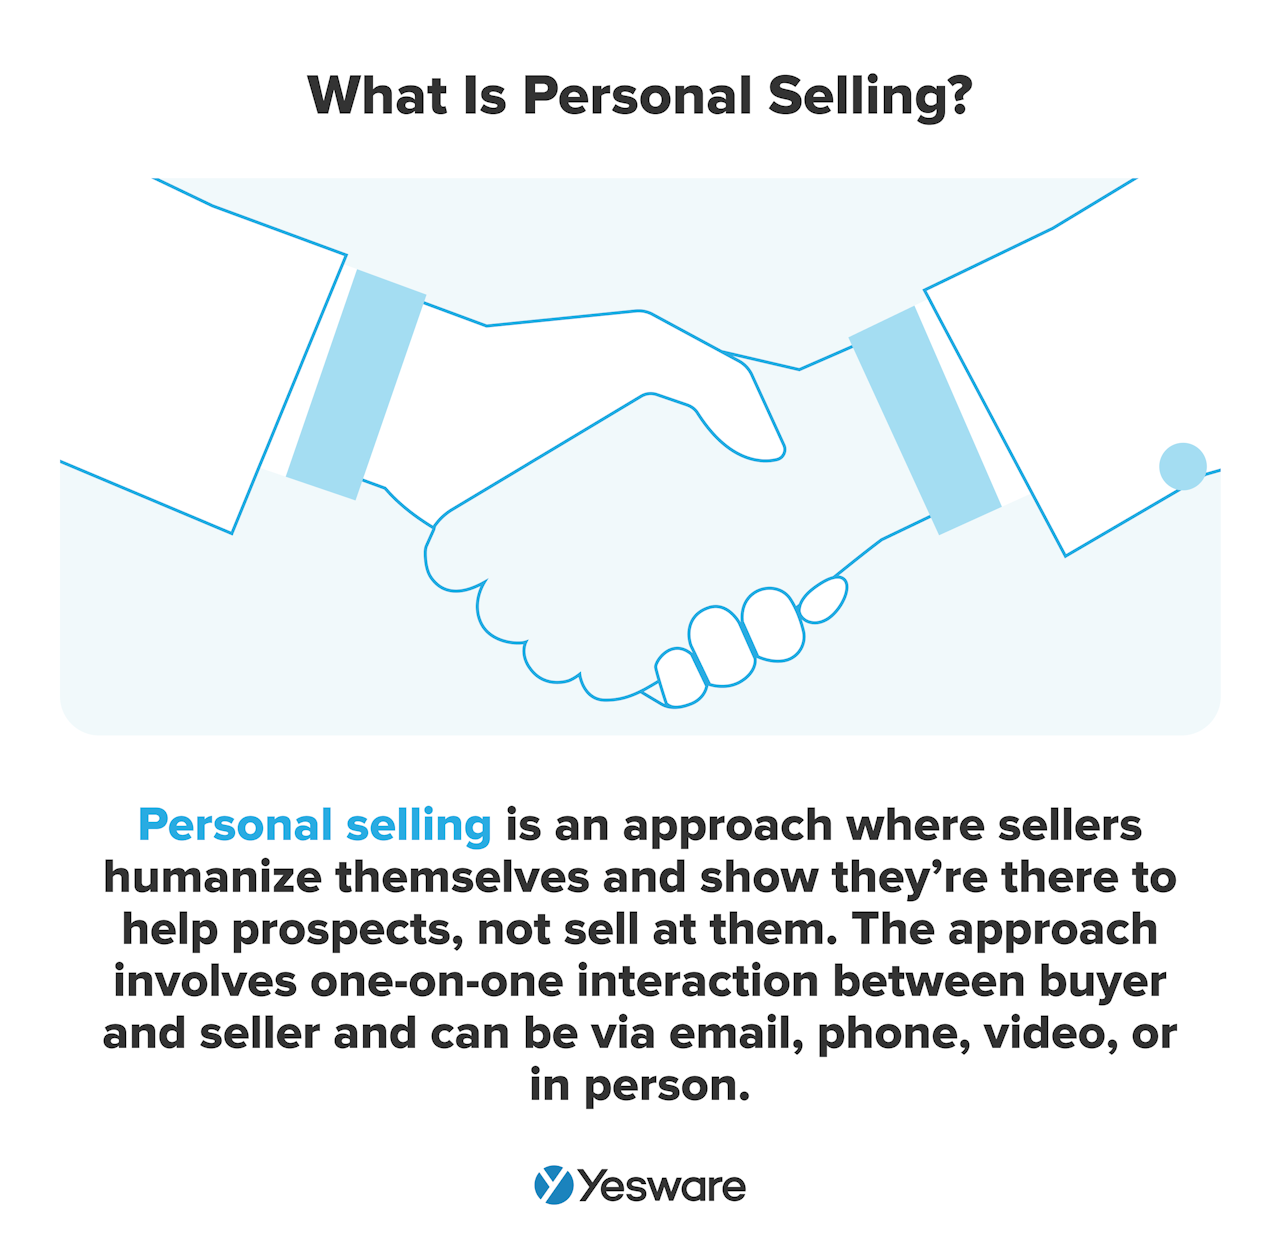 What is personal selling?